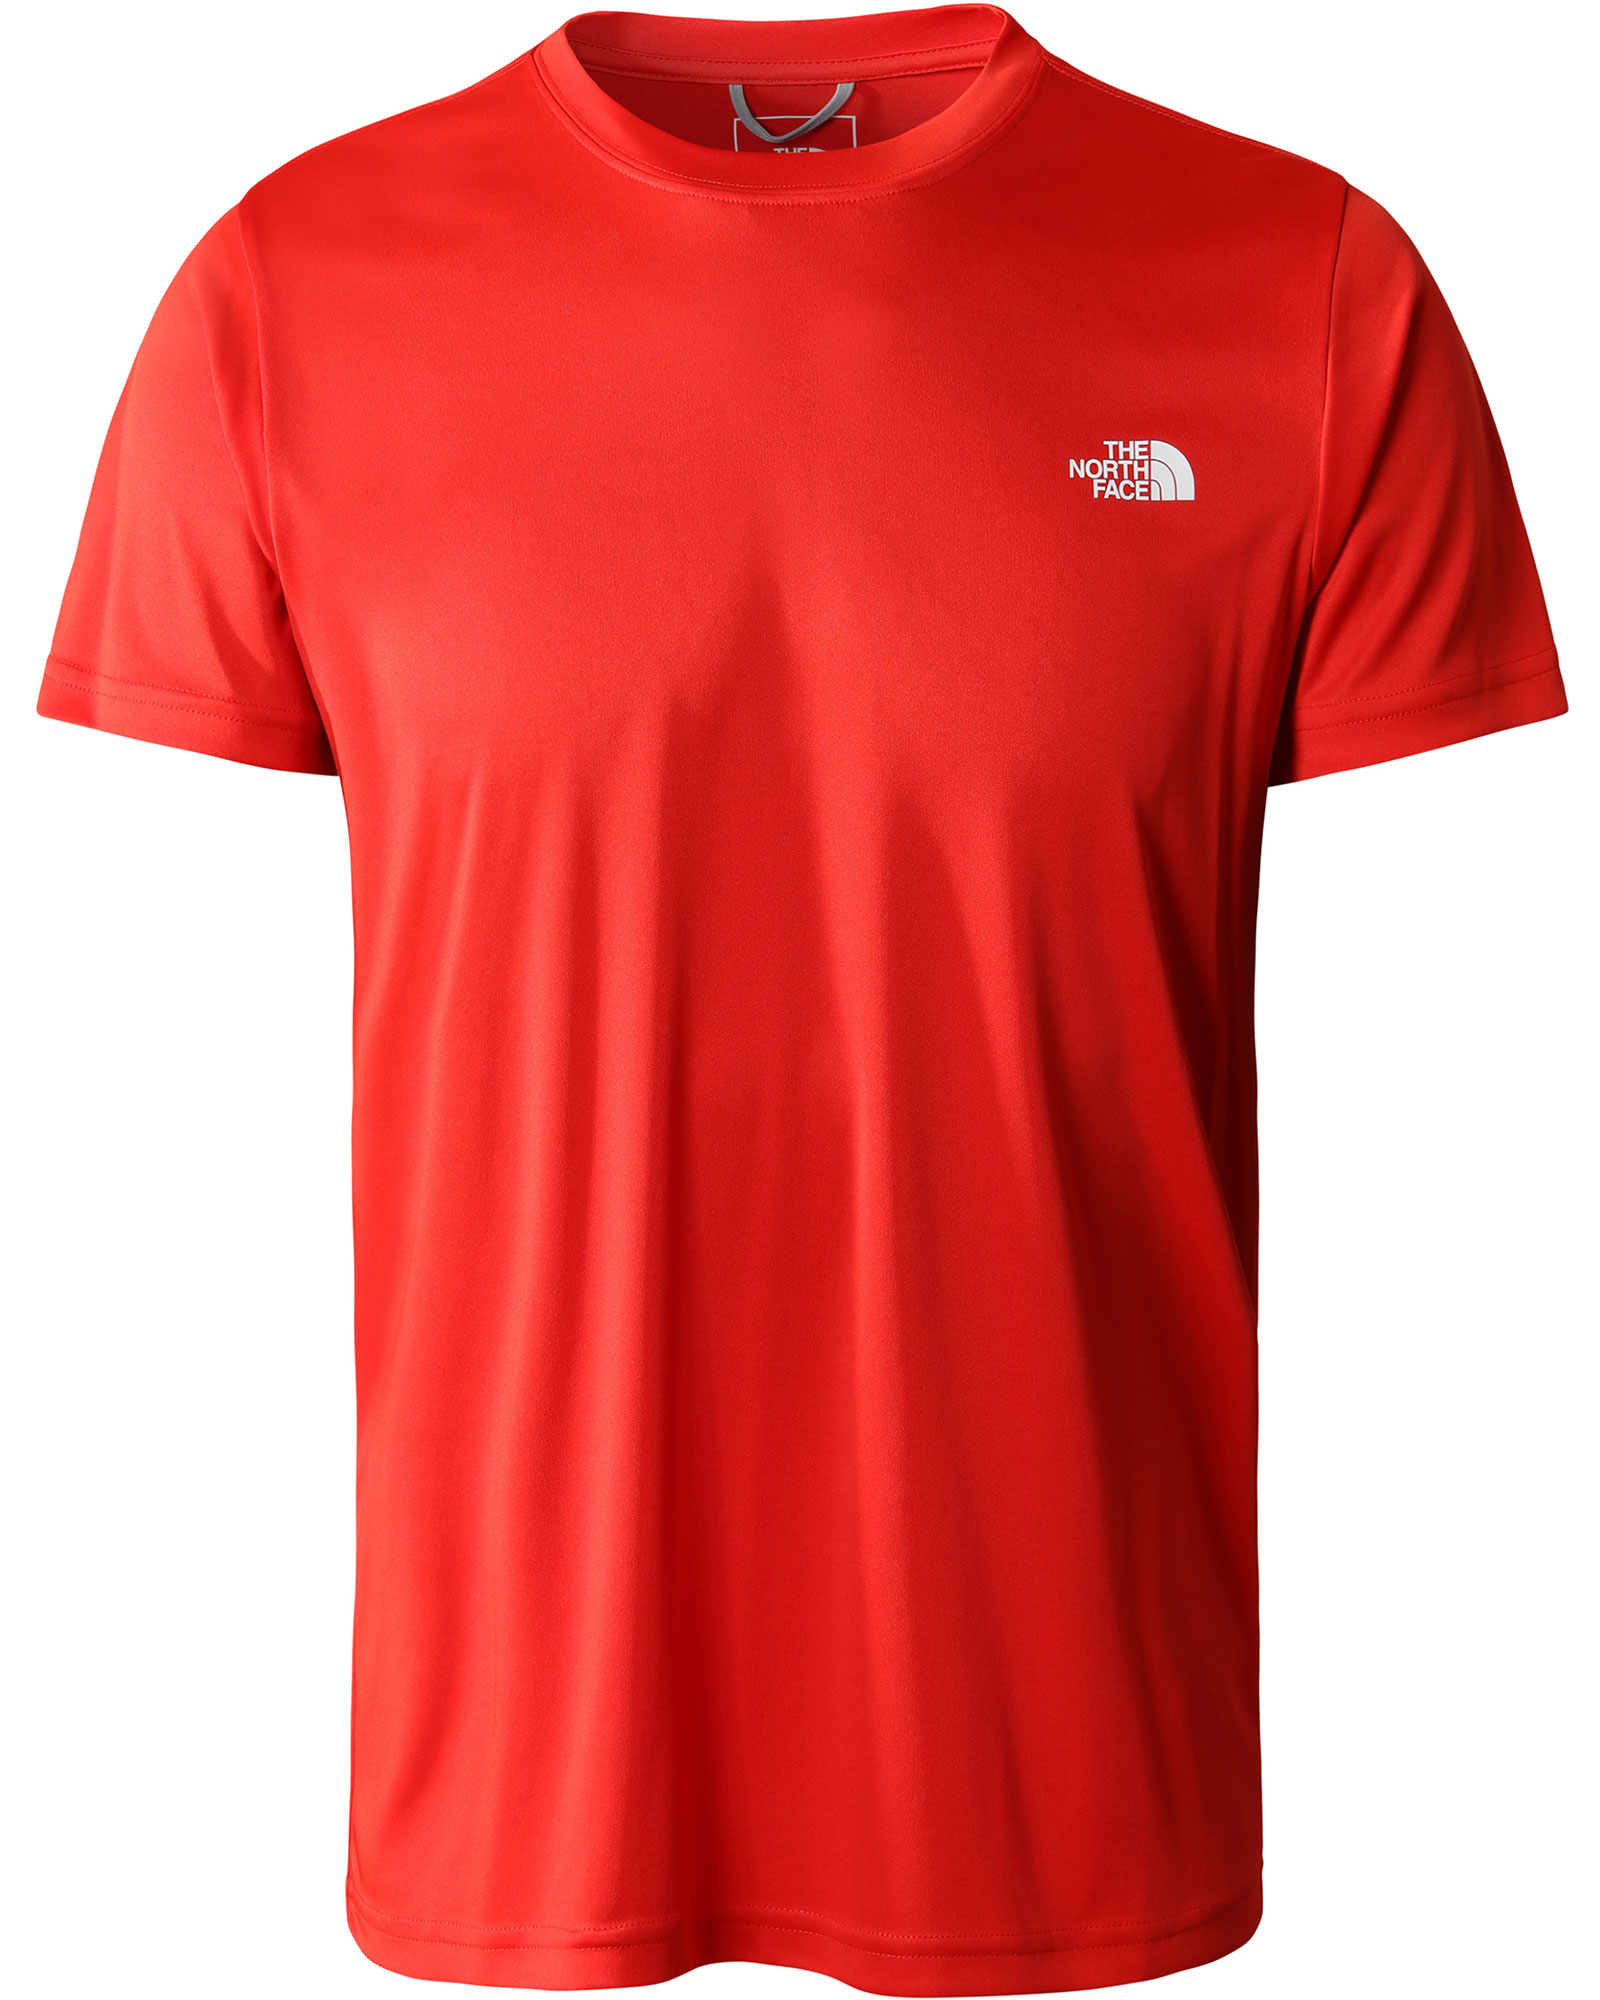 The North Face Reaxion Amp Men’s Crew T Shirt - Fiery Red XS